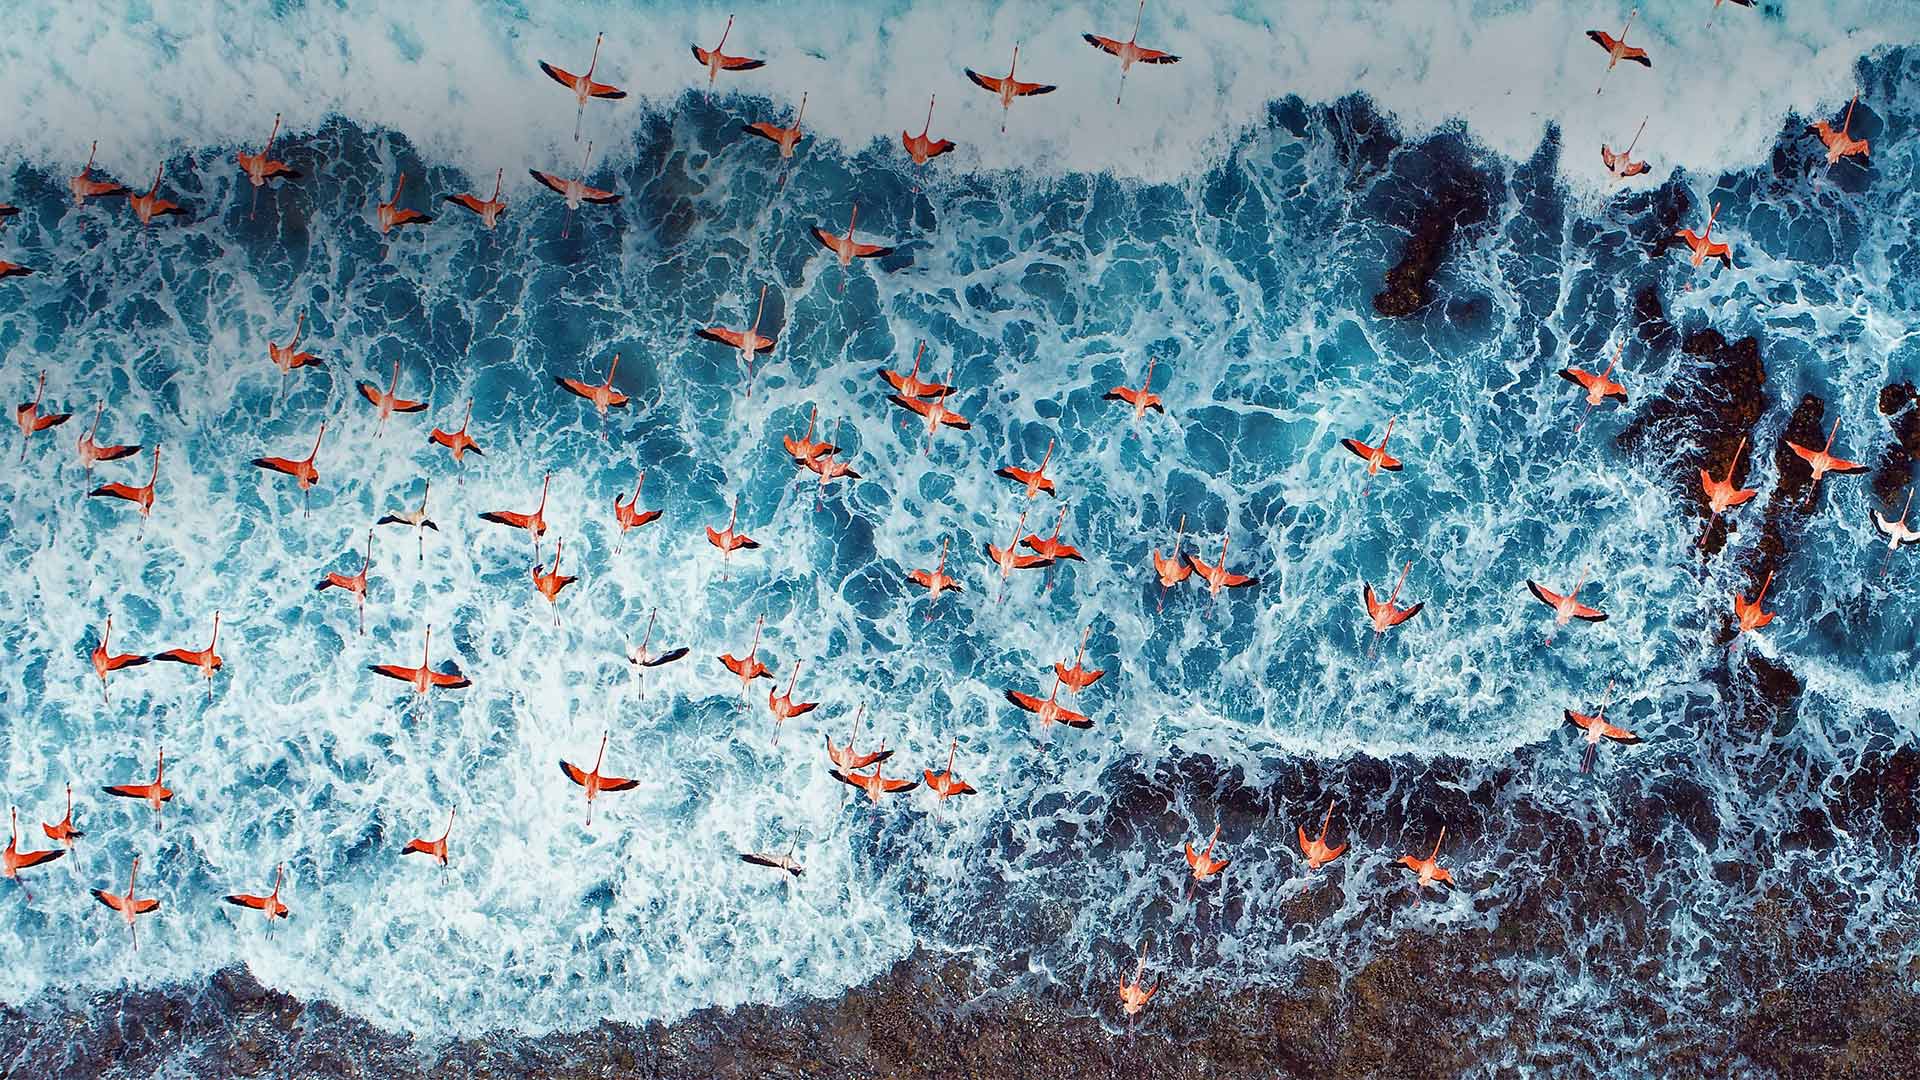 Aerial view of American flamingos flying over Los Roques Archipelago National Park, Venezuela - Cristian Lourenco/Getty Images)